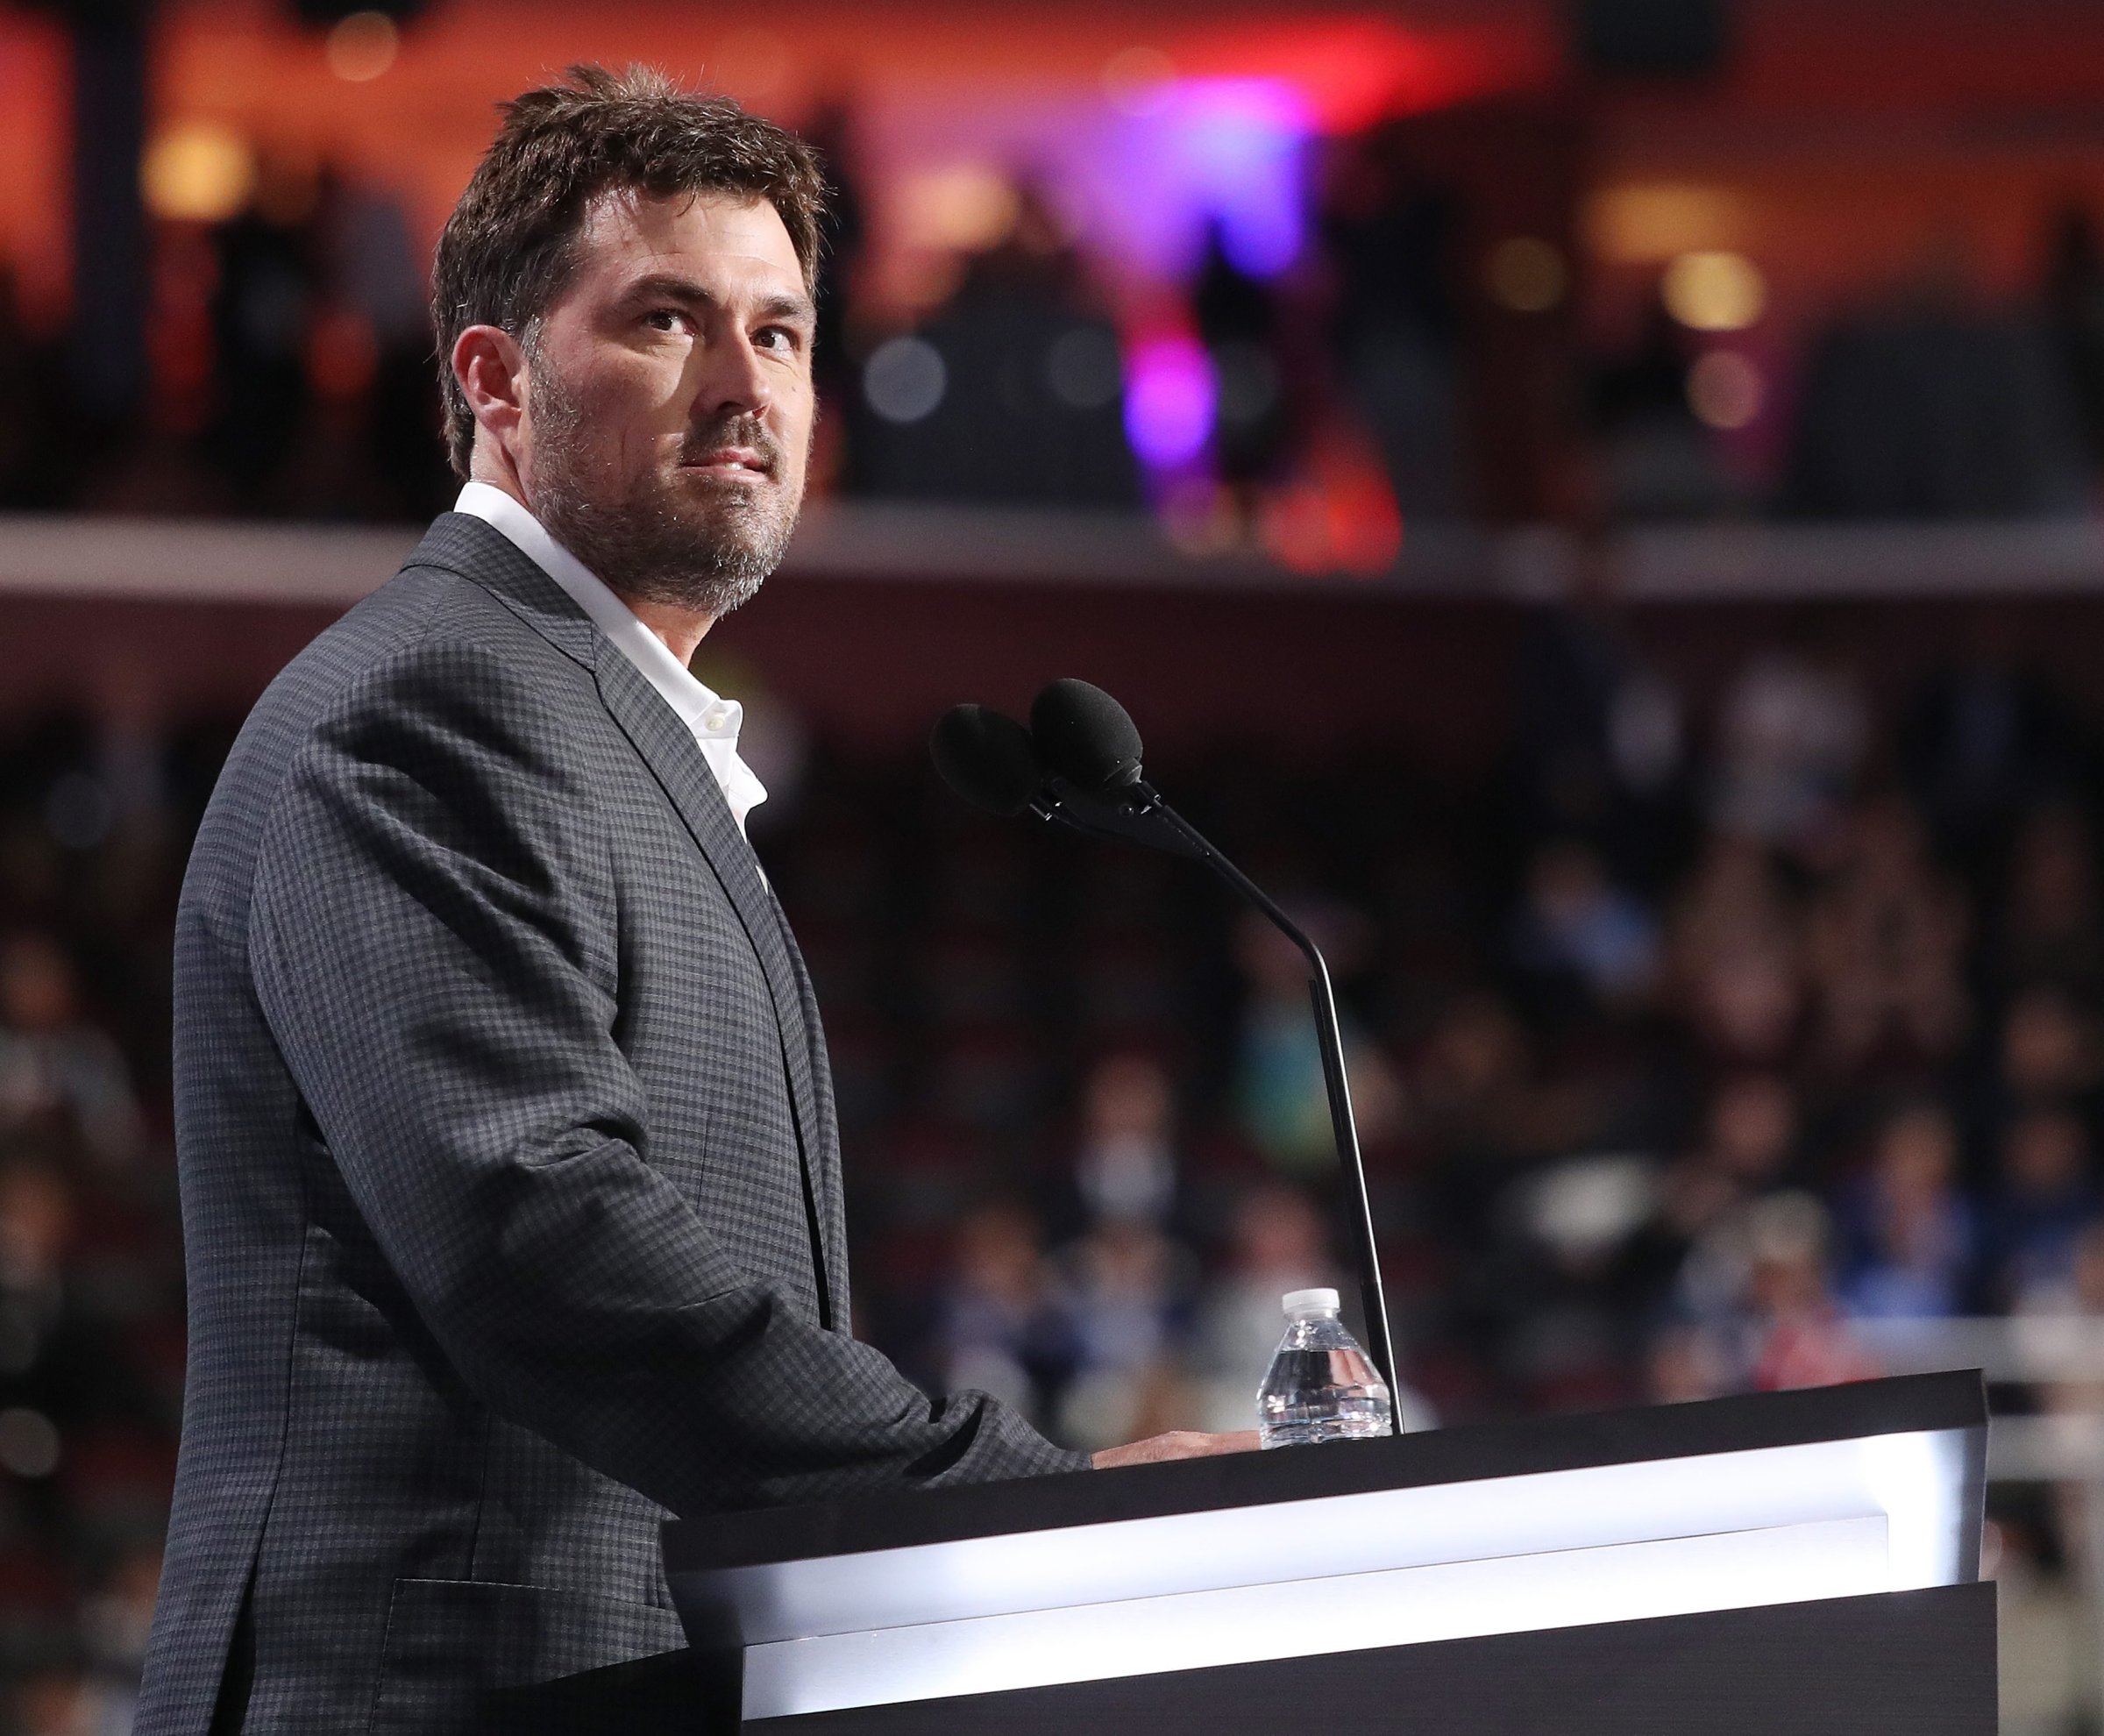 Former navy Seal Marcus Luttrell speaks during the second session during the first day of the 2016 Republican National Convention at Quicken Loans Arena in Cleveland, July 18, 2016.